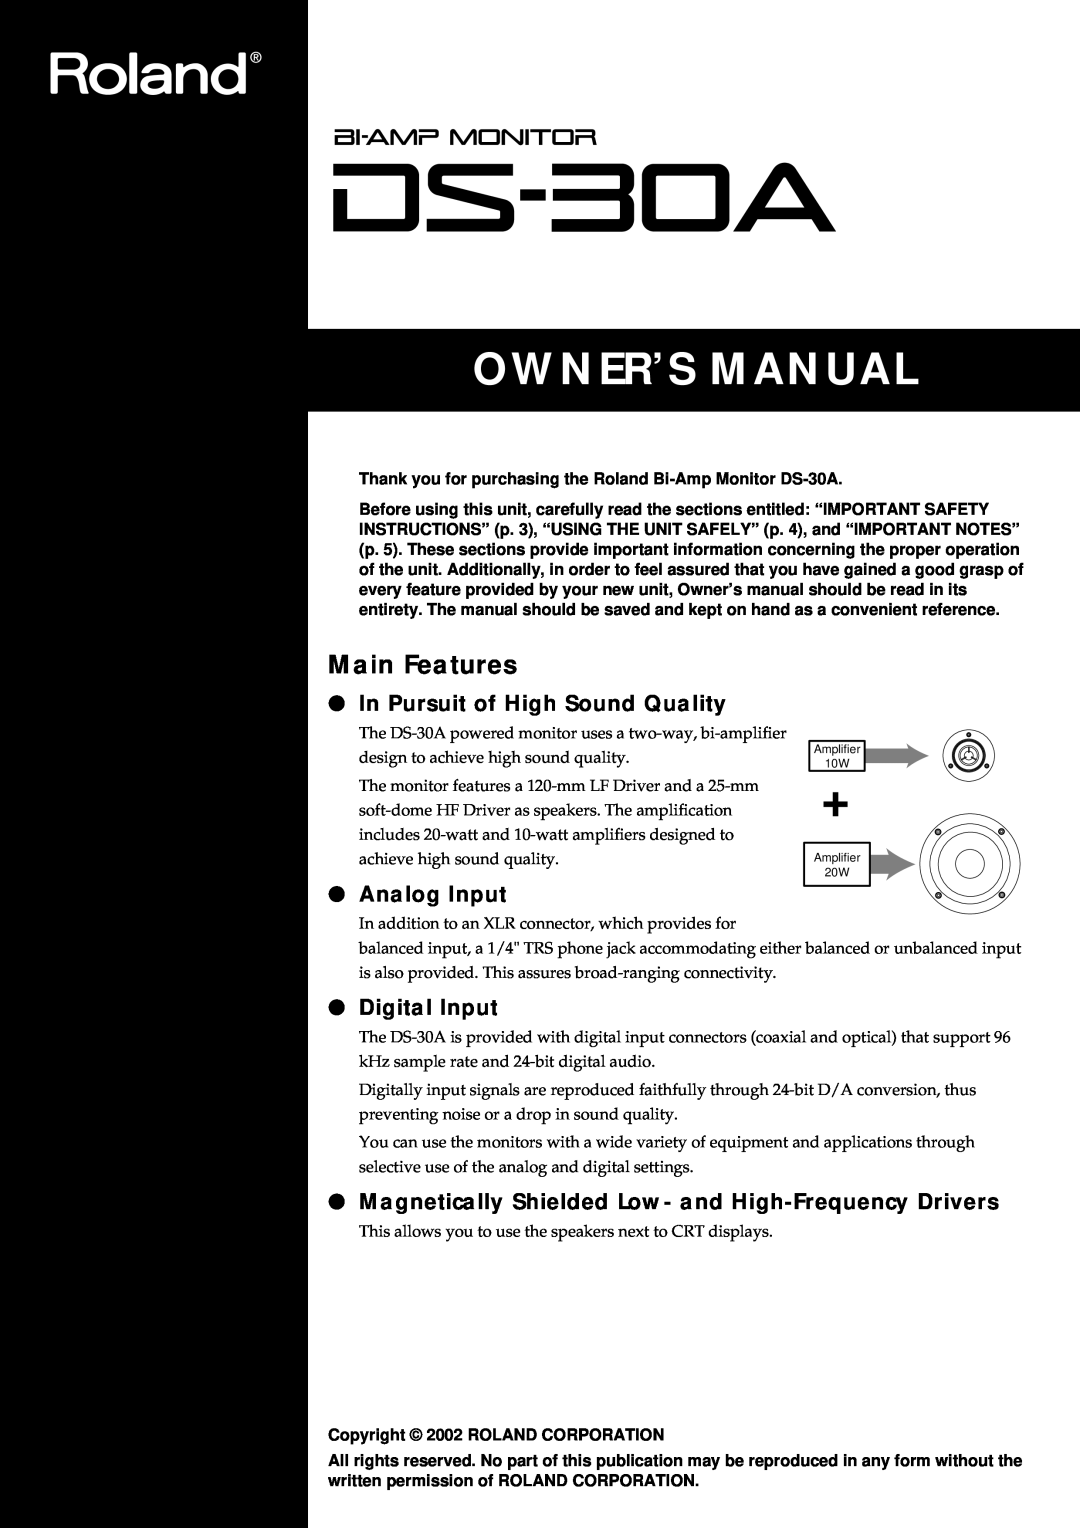 Roland DS-30A owner manual In Pursuit of High Sound Quality, Analog Input, Digital Input, Owner’S Manual, Main Features 